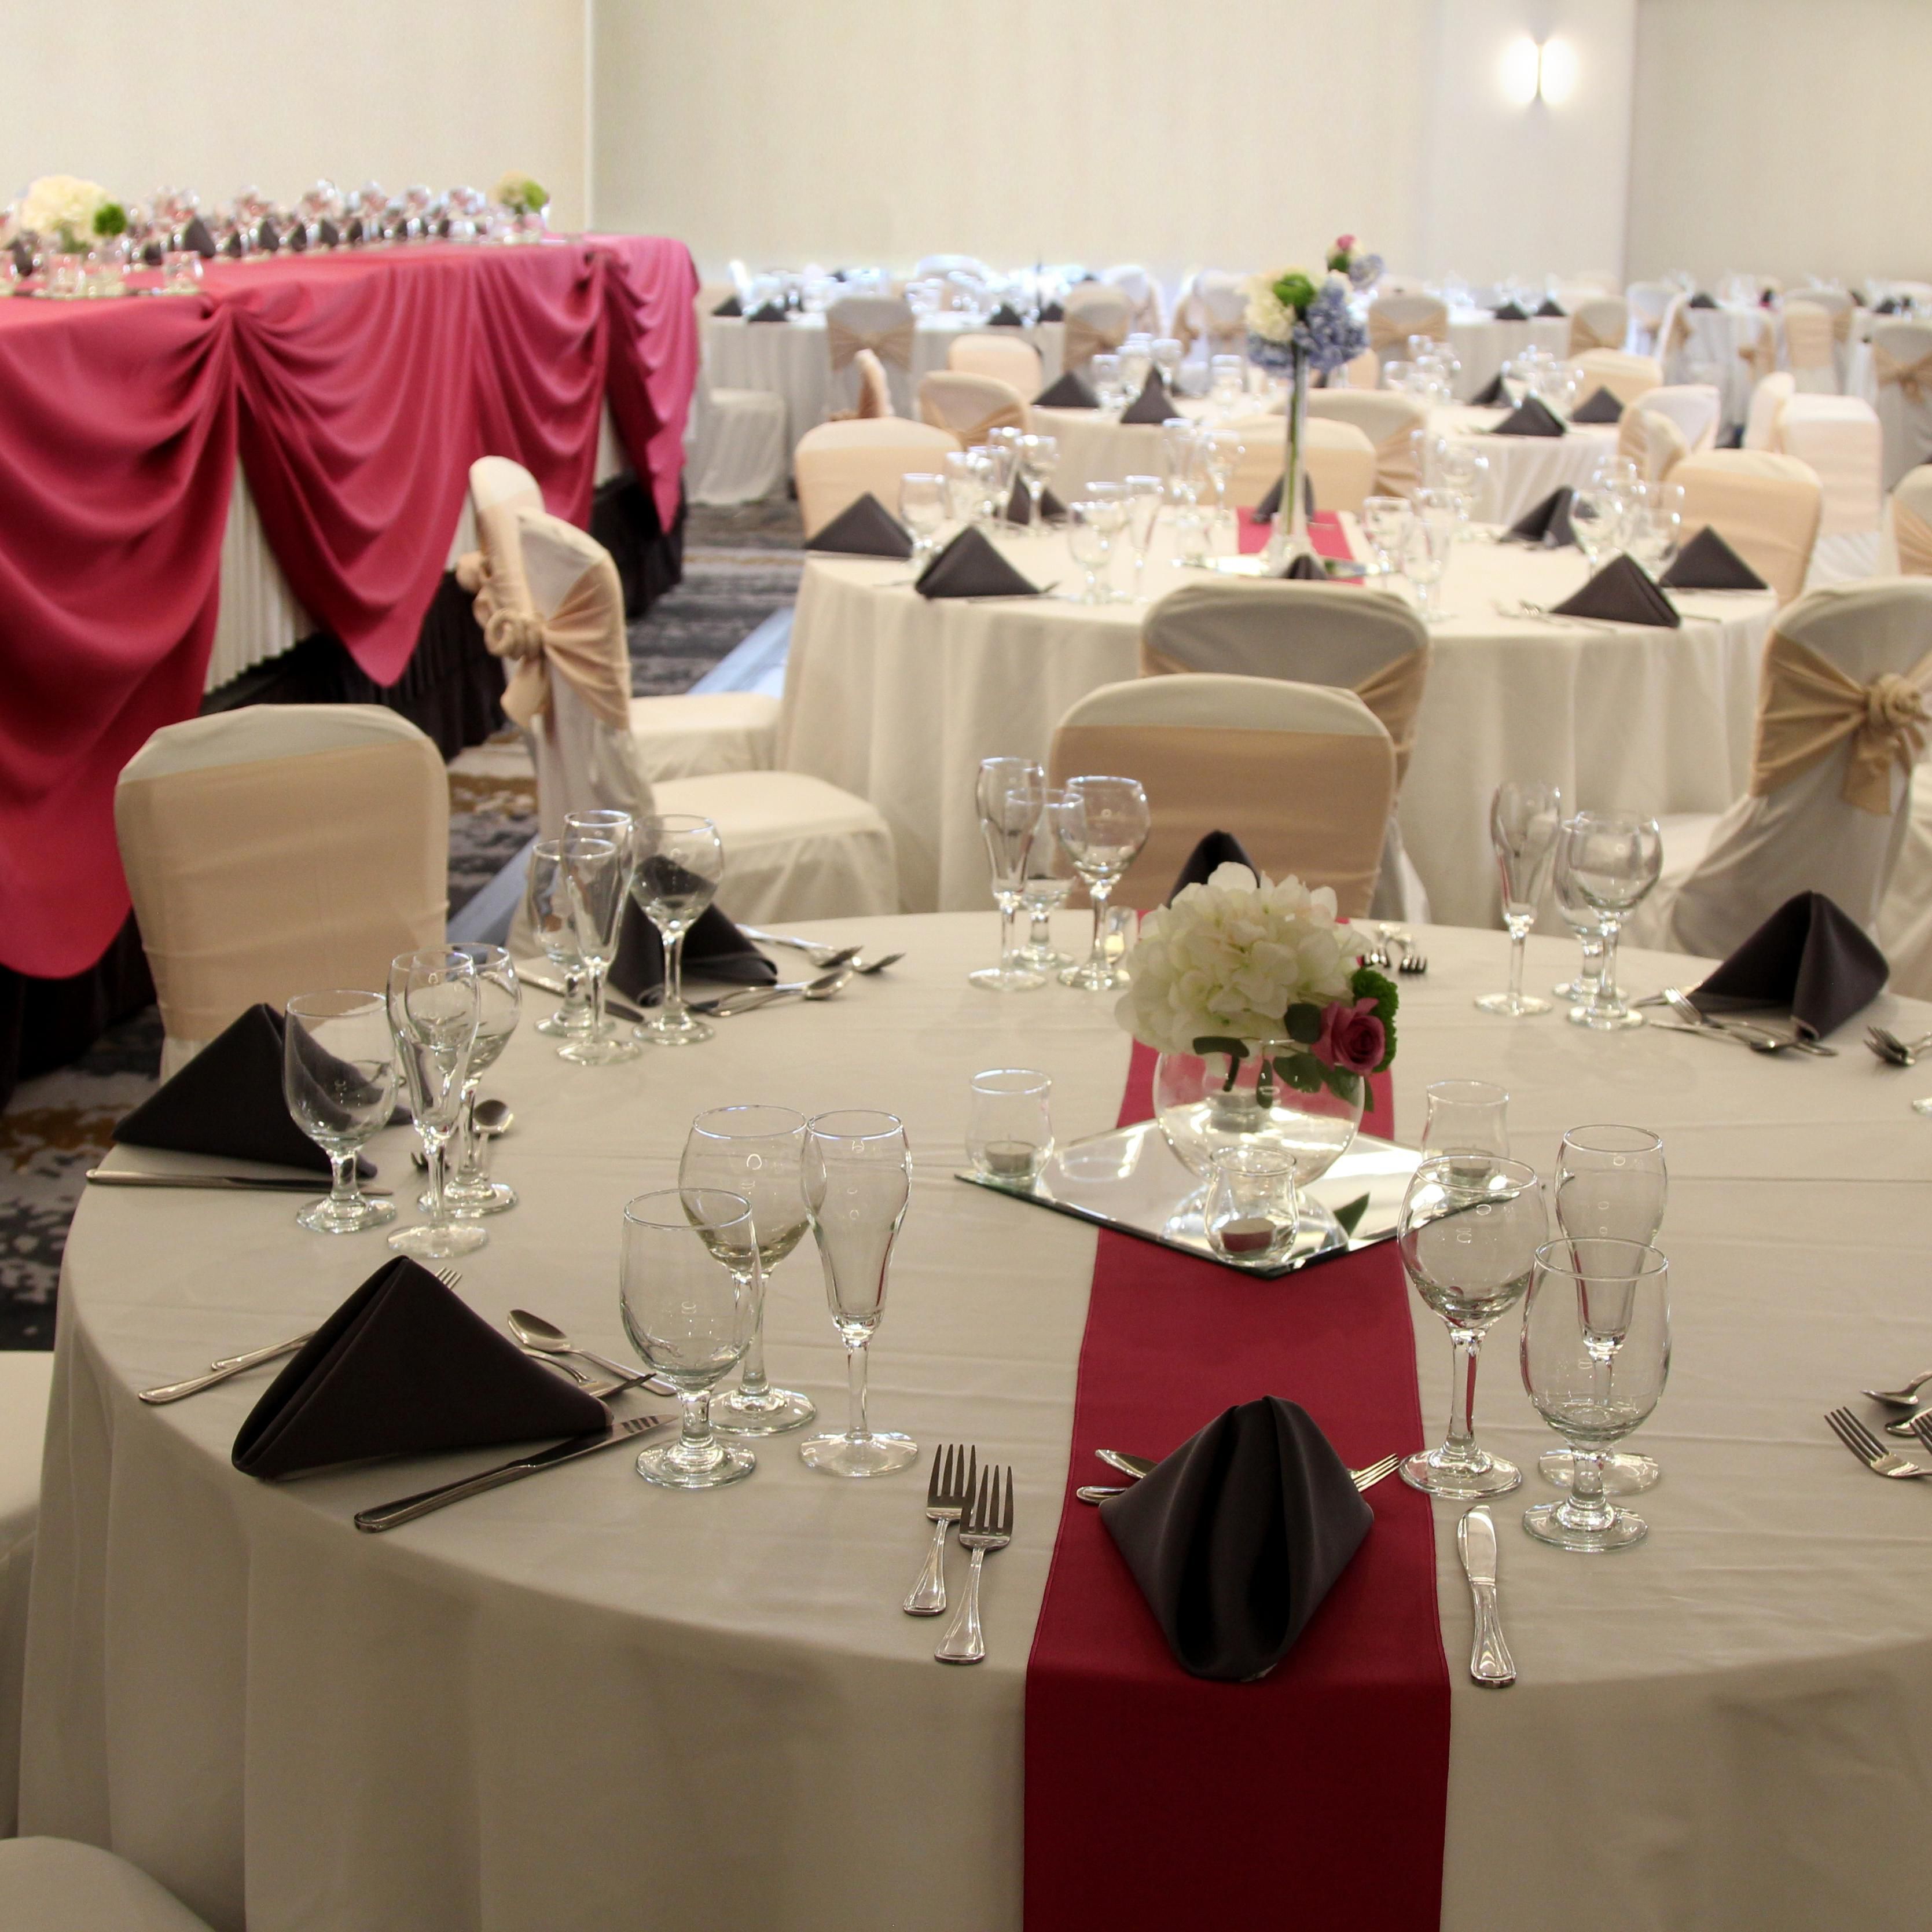 Let us plan your wedding - newly renovated Lincoln Ballroom